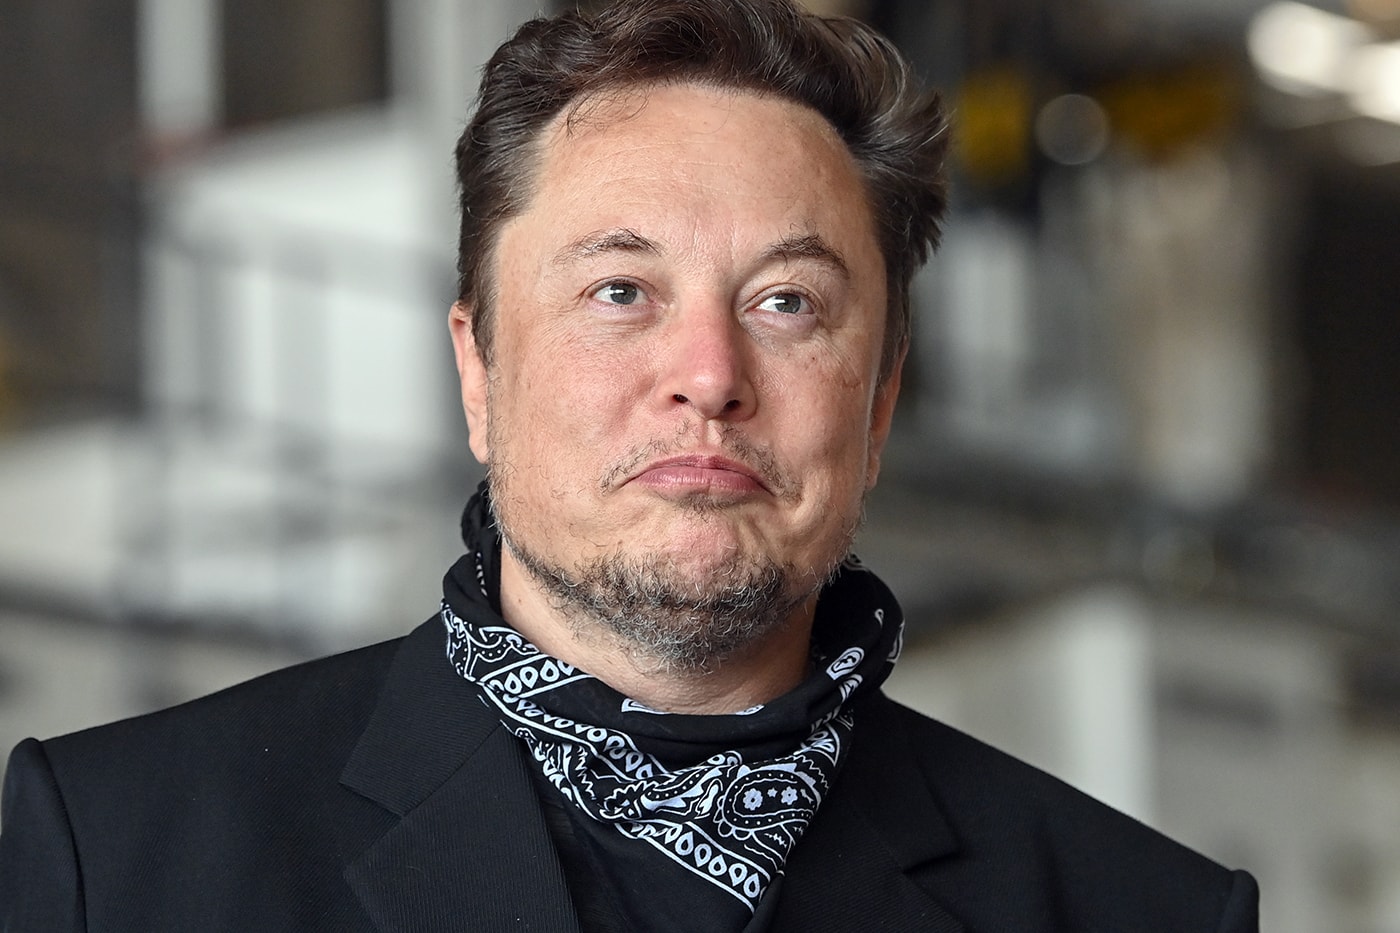 Elon Musk Asks Twitter If He Should Sell Tesla Stocks to Pay Taxes 25 billion usd